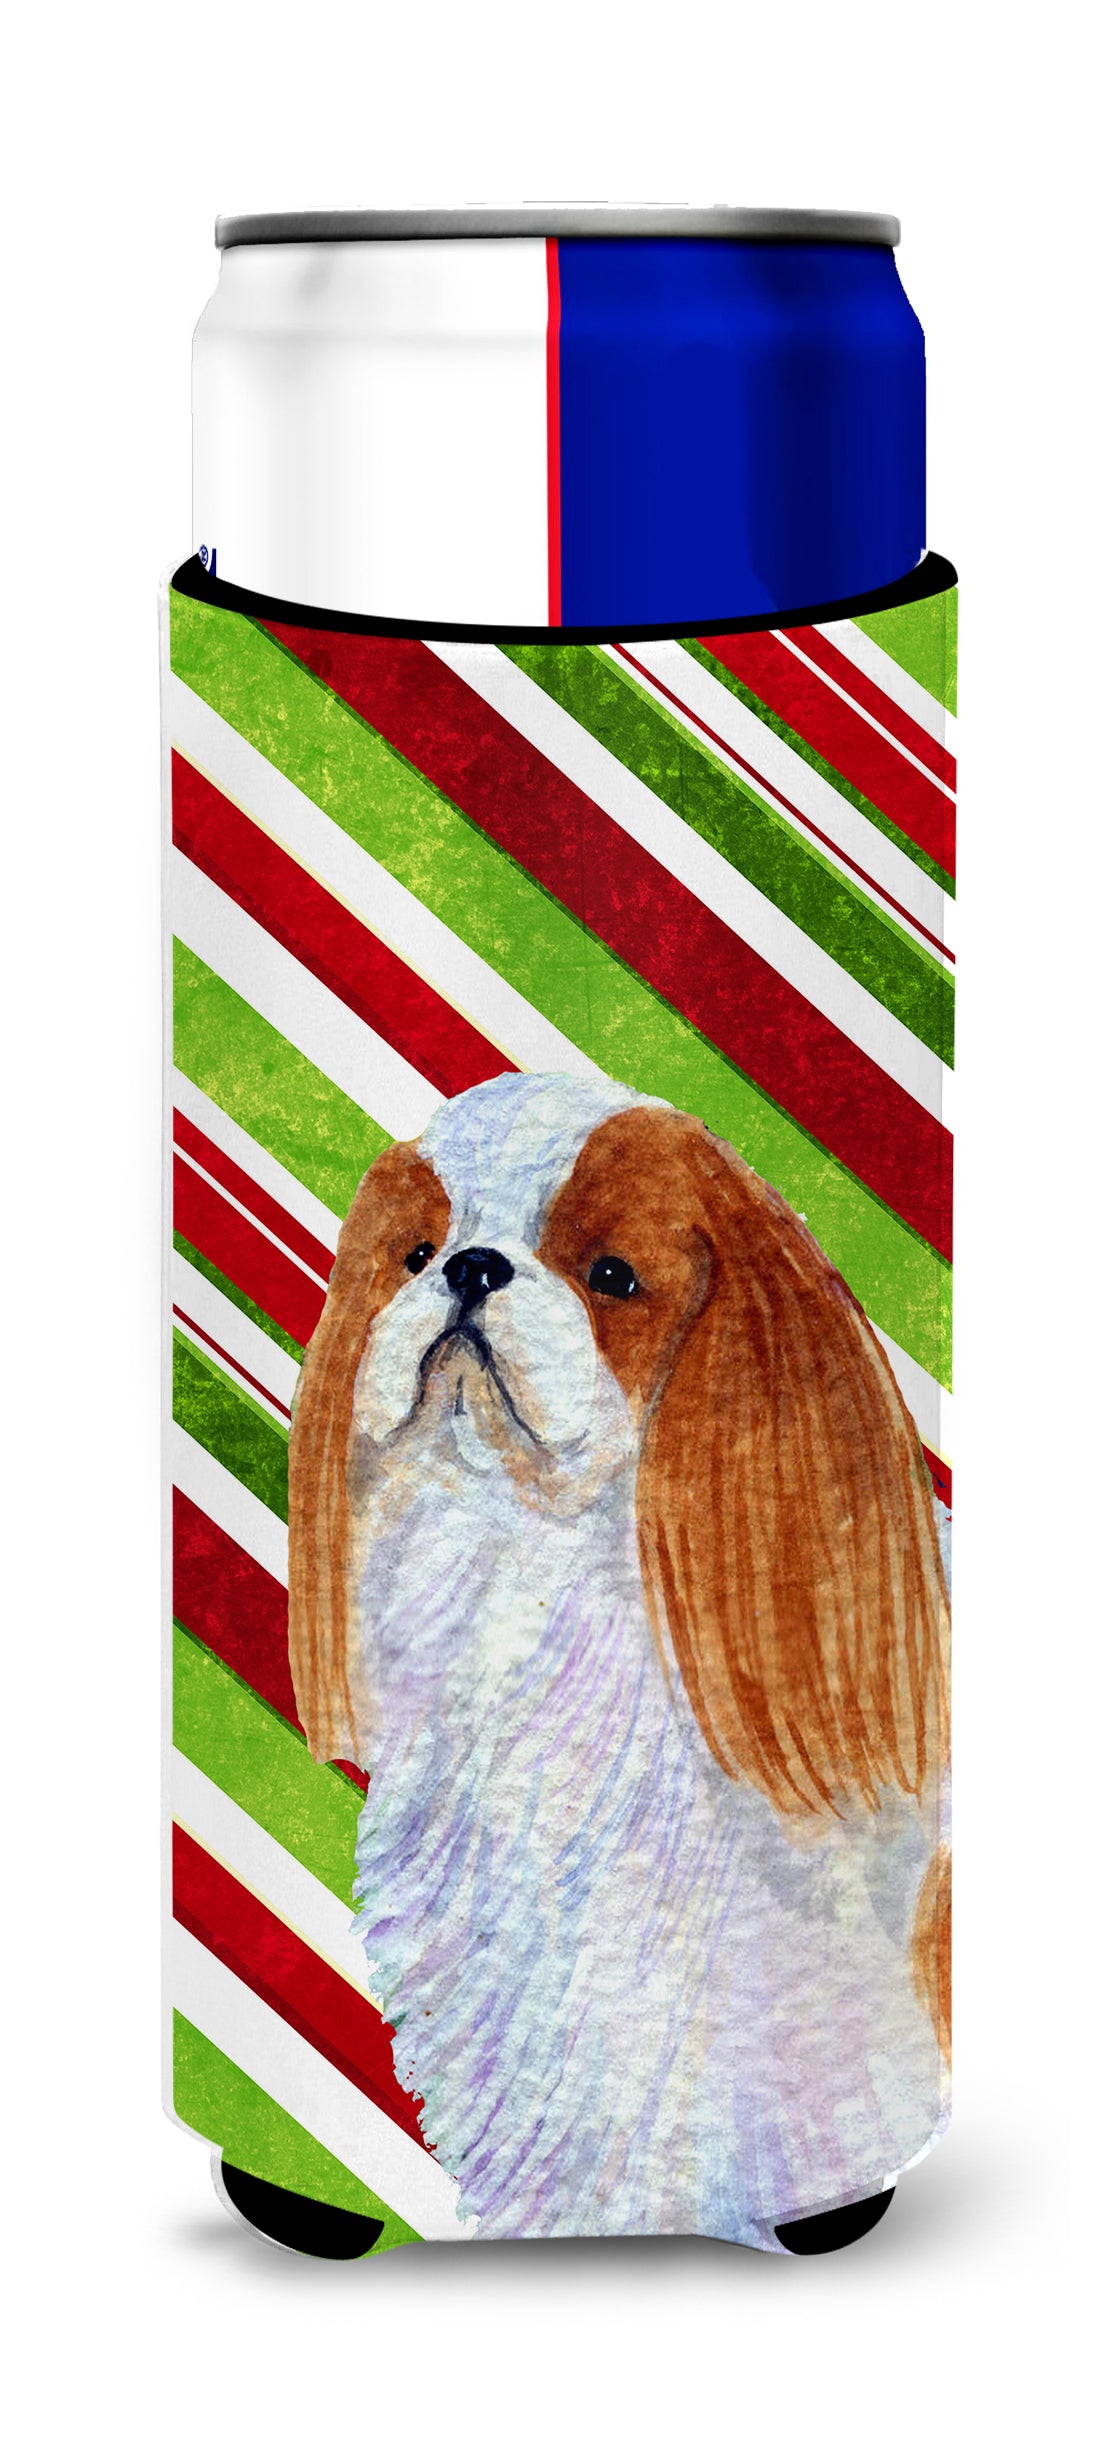 English Toy Spaniel Candy Cane Holiday Christmas Ultra Beverage Insulators for slim cans SS4576MUK.